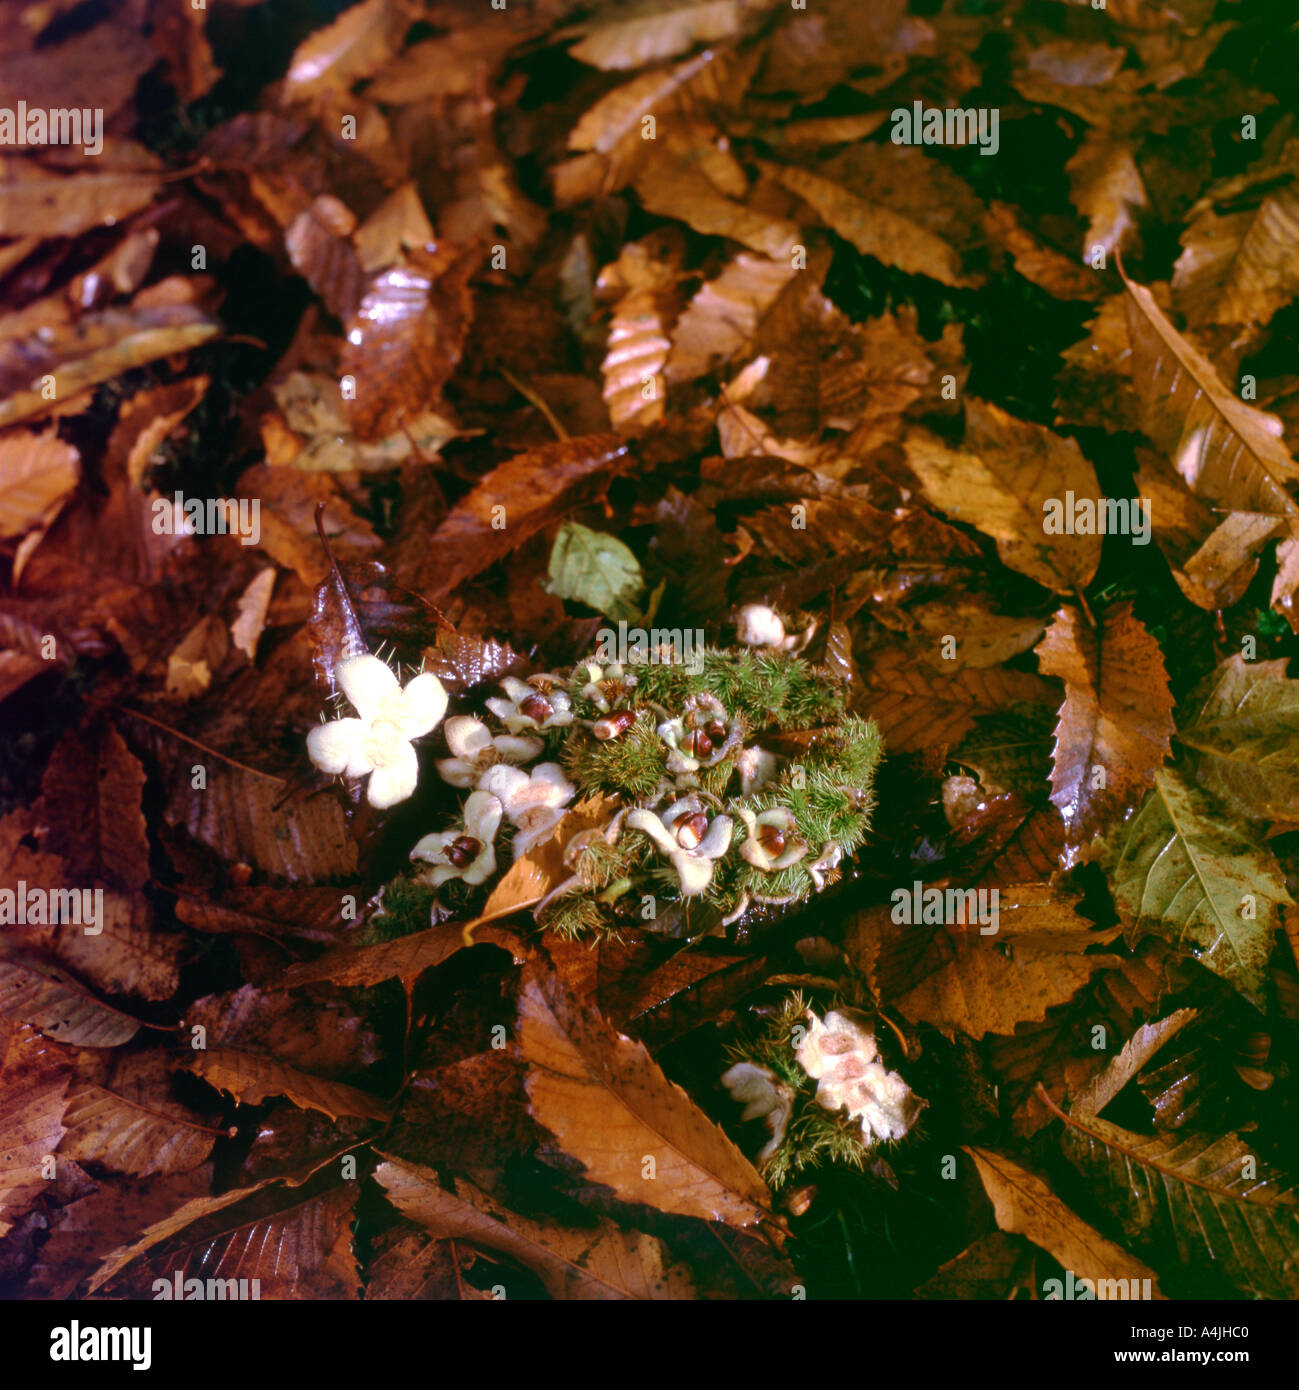 Beech nuts and autumn leaves in Wales UK Stock Photo